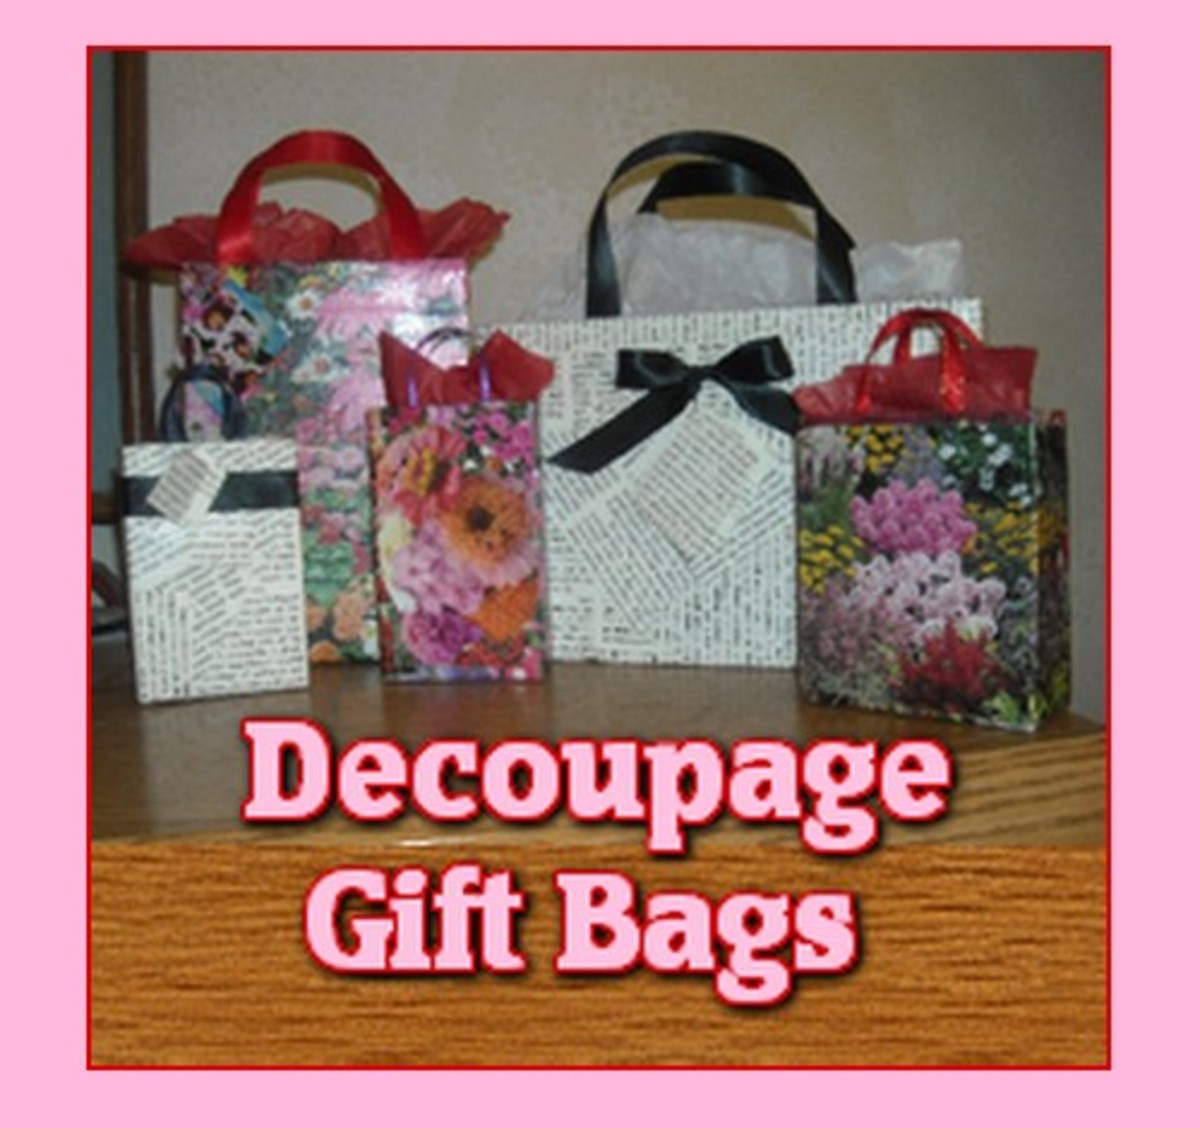 How to Make Decoupage Gift Bags